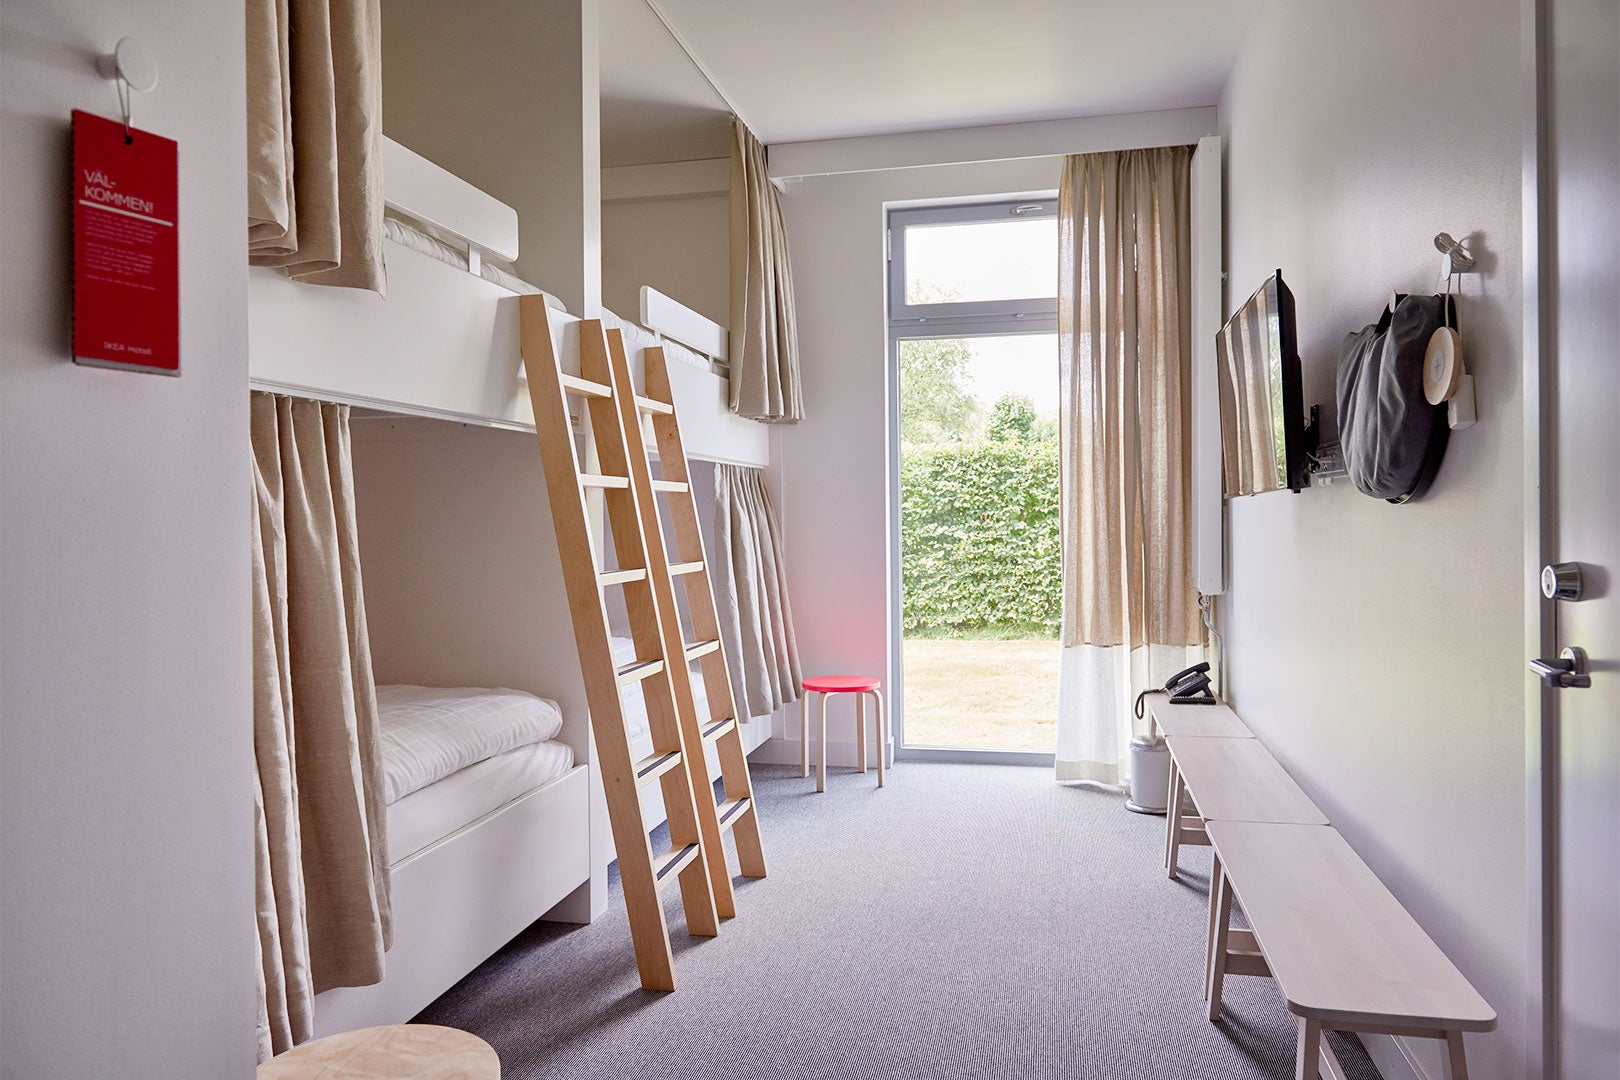 IKEA Hotell bunk room with ladder